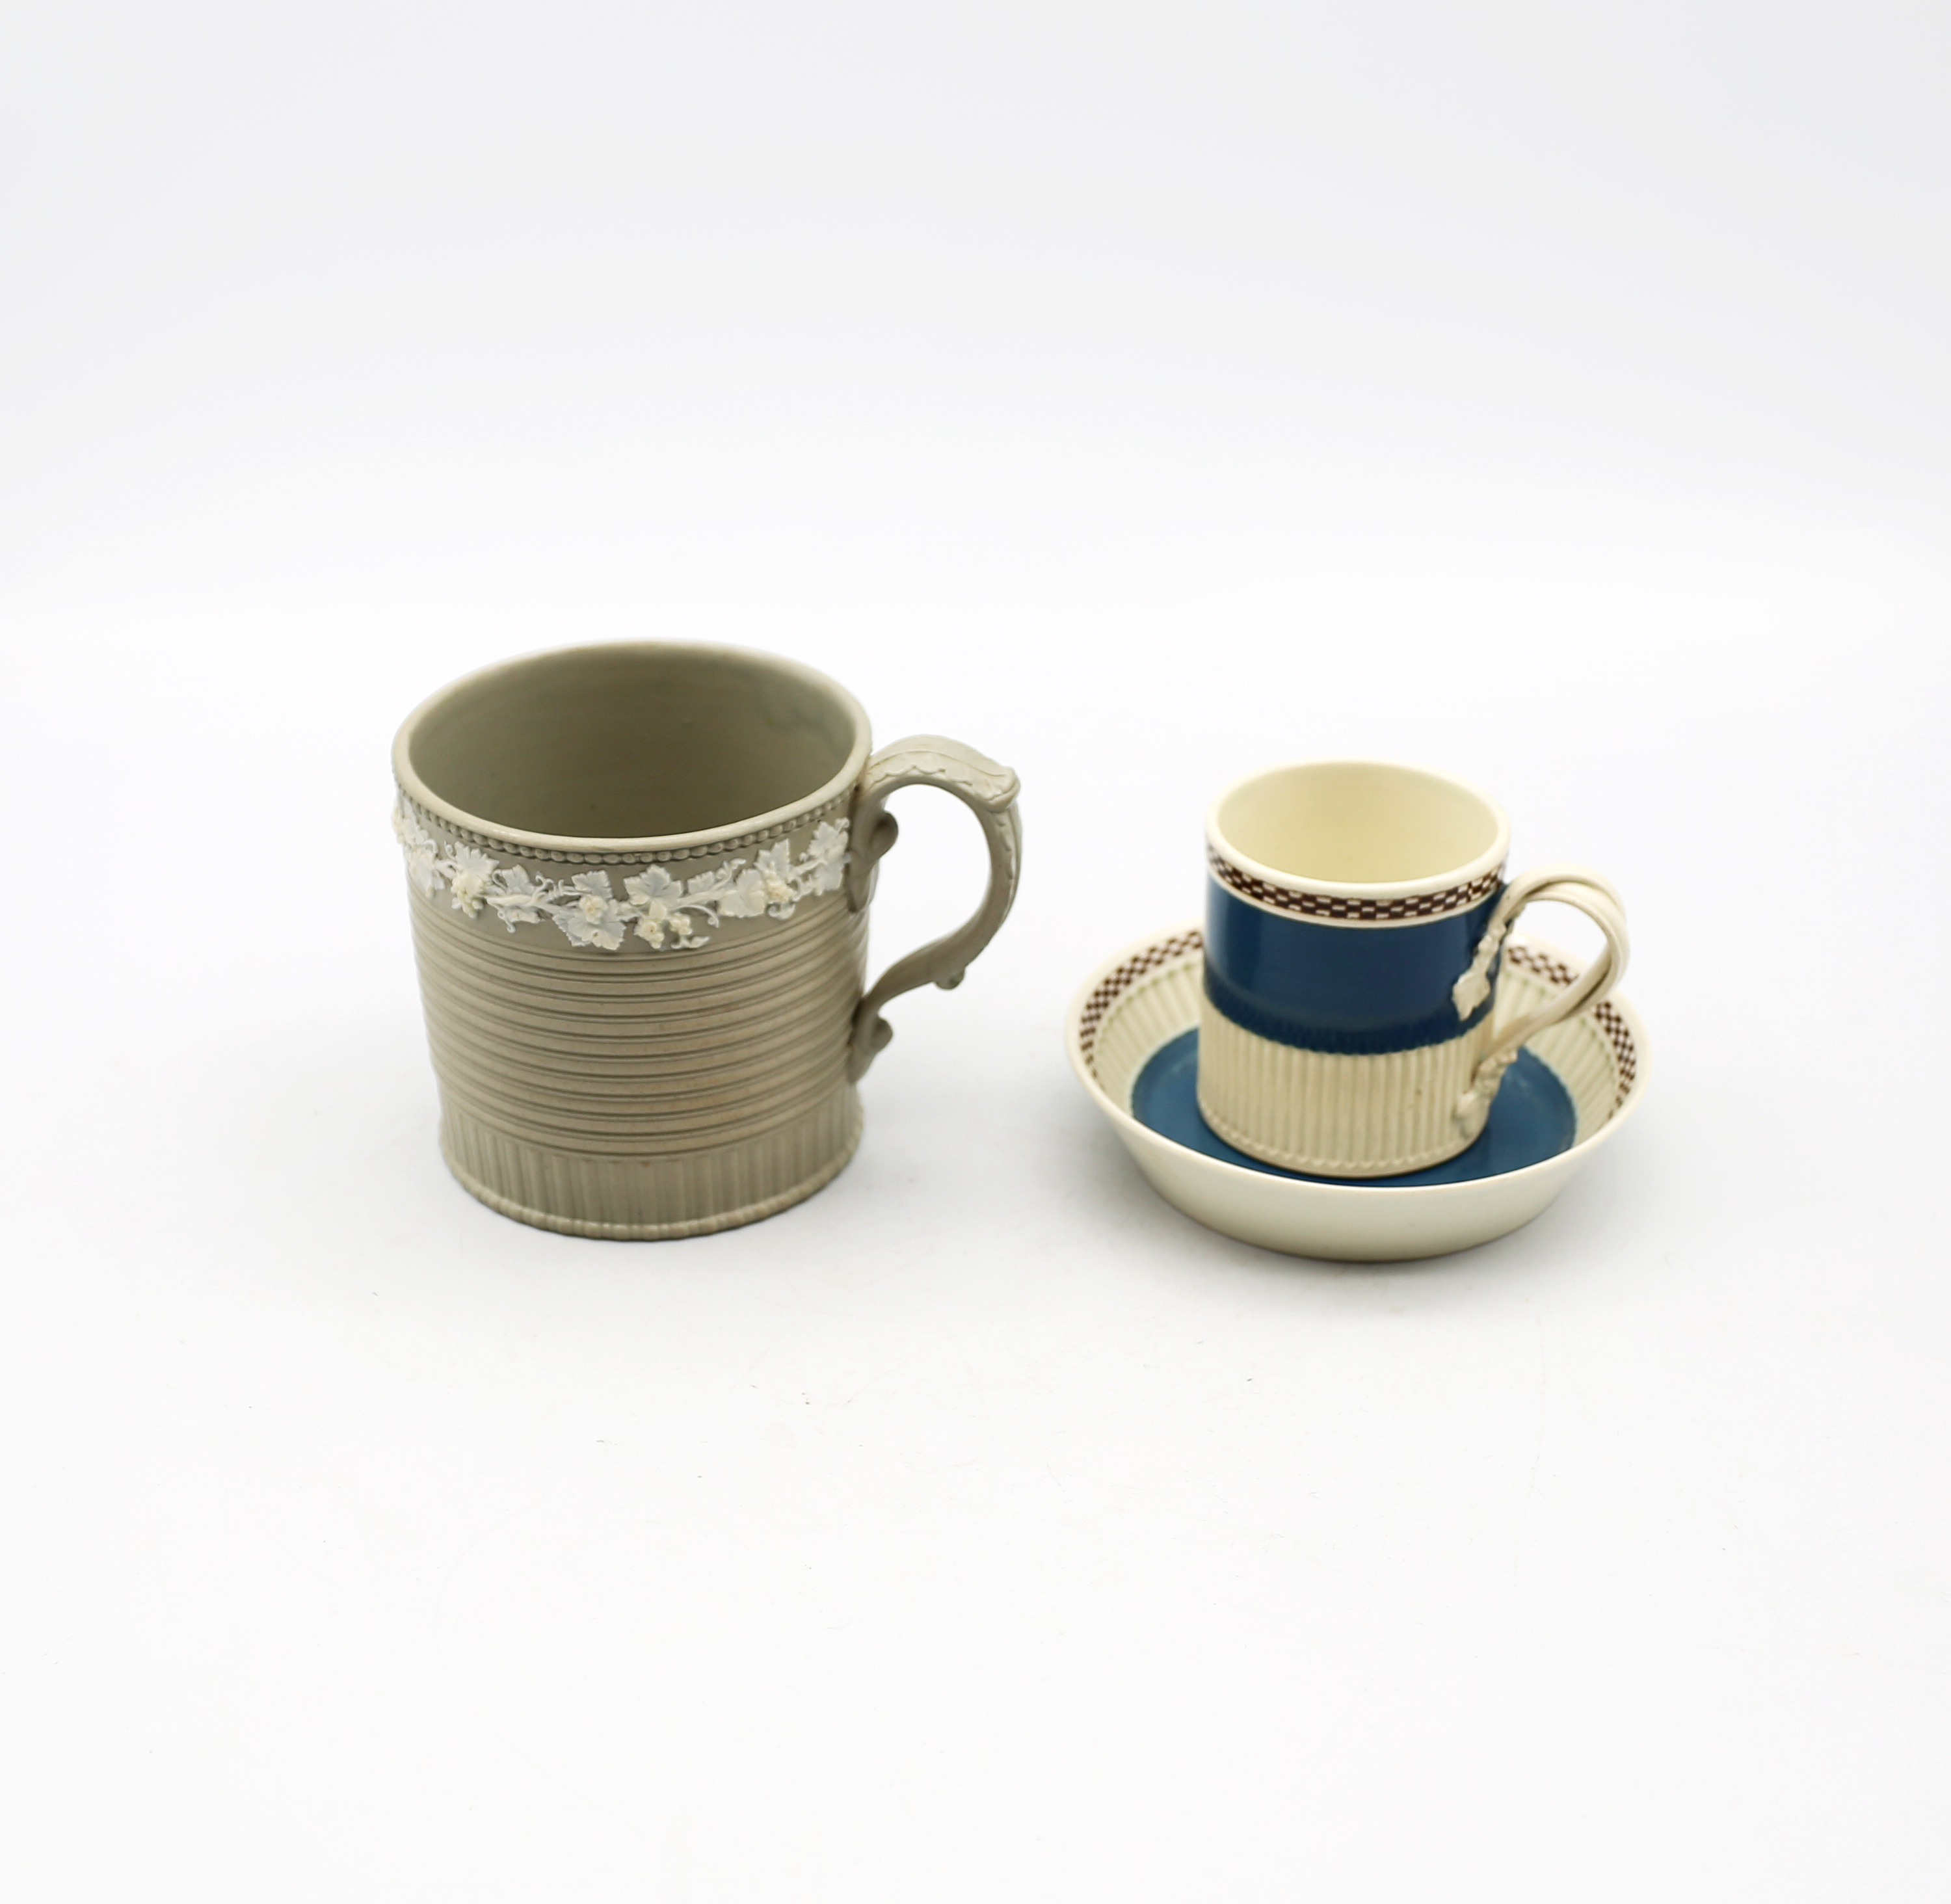 A Drabware sprigged mug, grey ground with grape and vine sprigging, along with a Mocha ware coffee